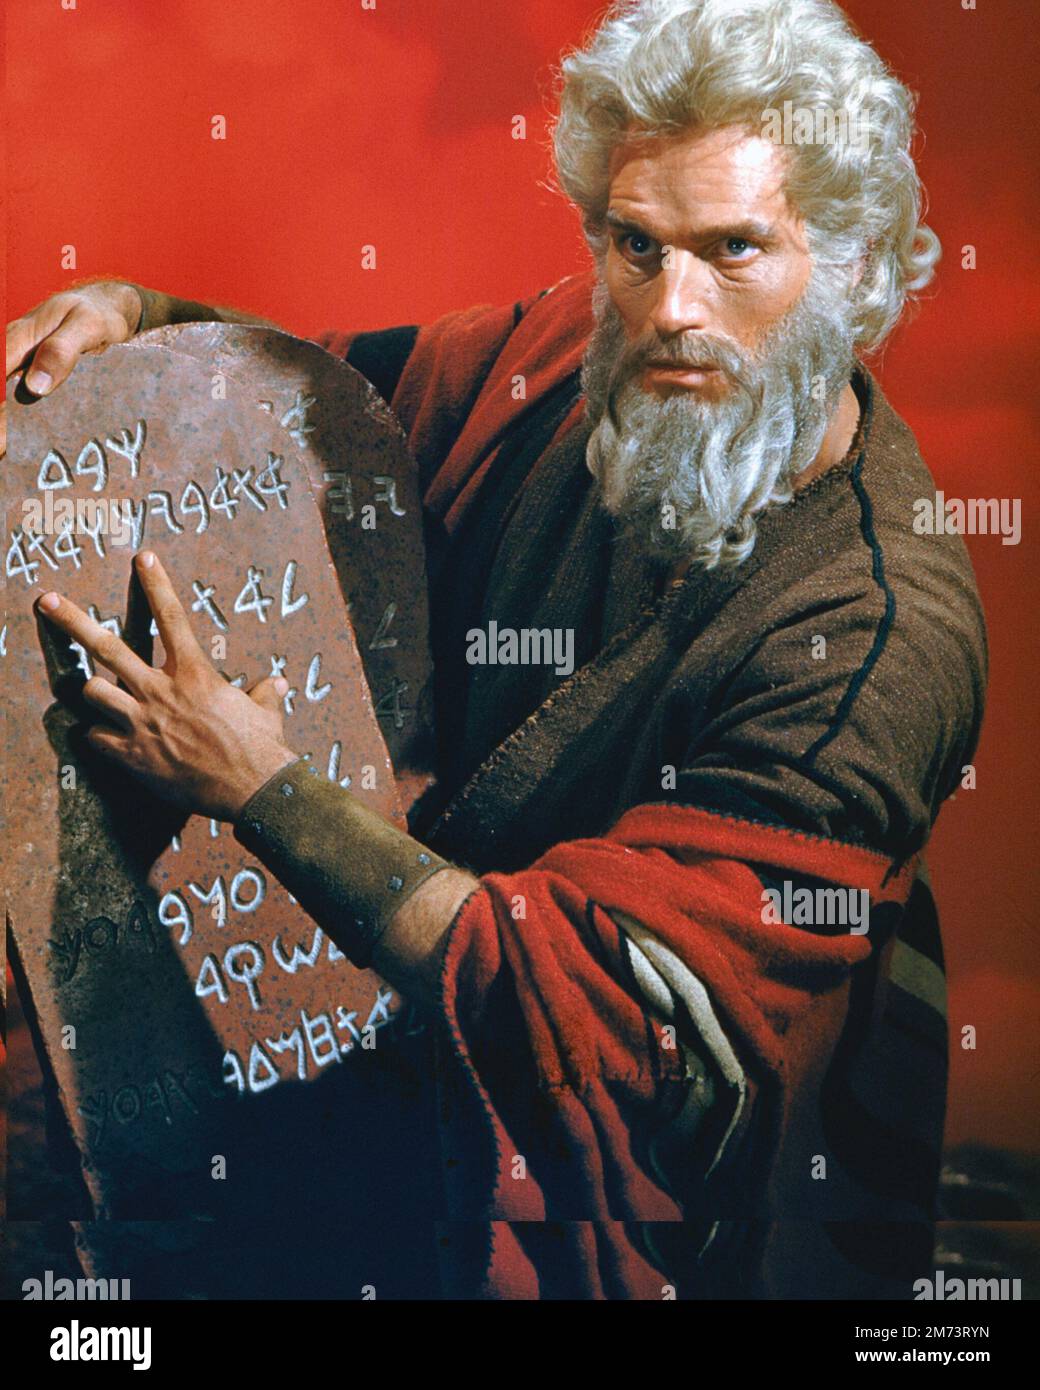 CHARLTON HESTON in THE TEN COMMANDMENTS (1956), directed by CECIL B DEMILLE. Credit: PARAMOUNT PICTURES / Album Stock Photo